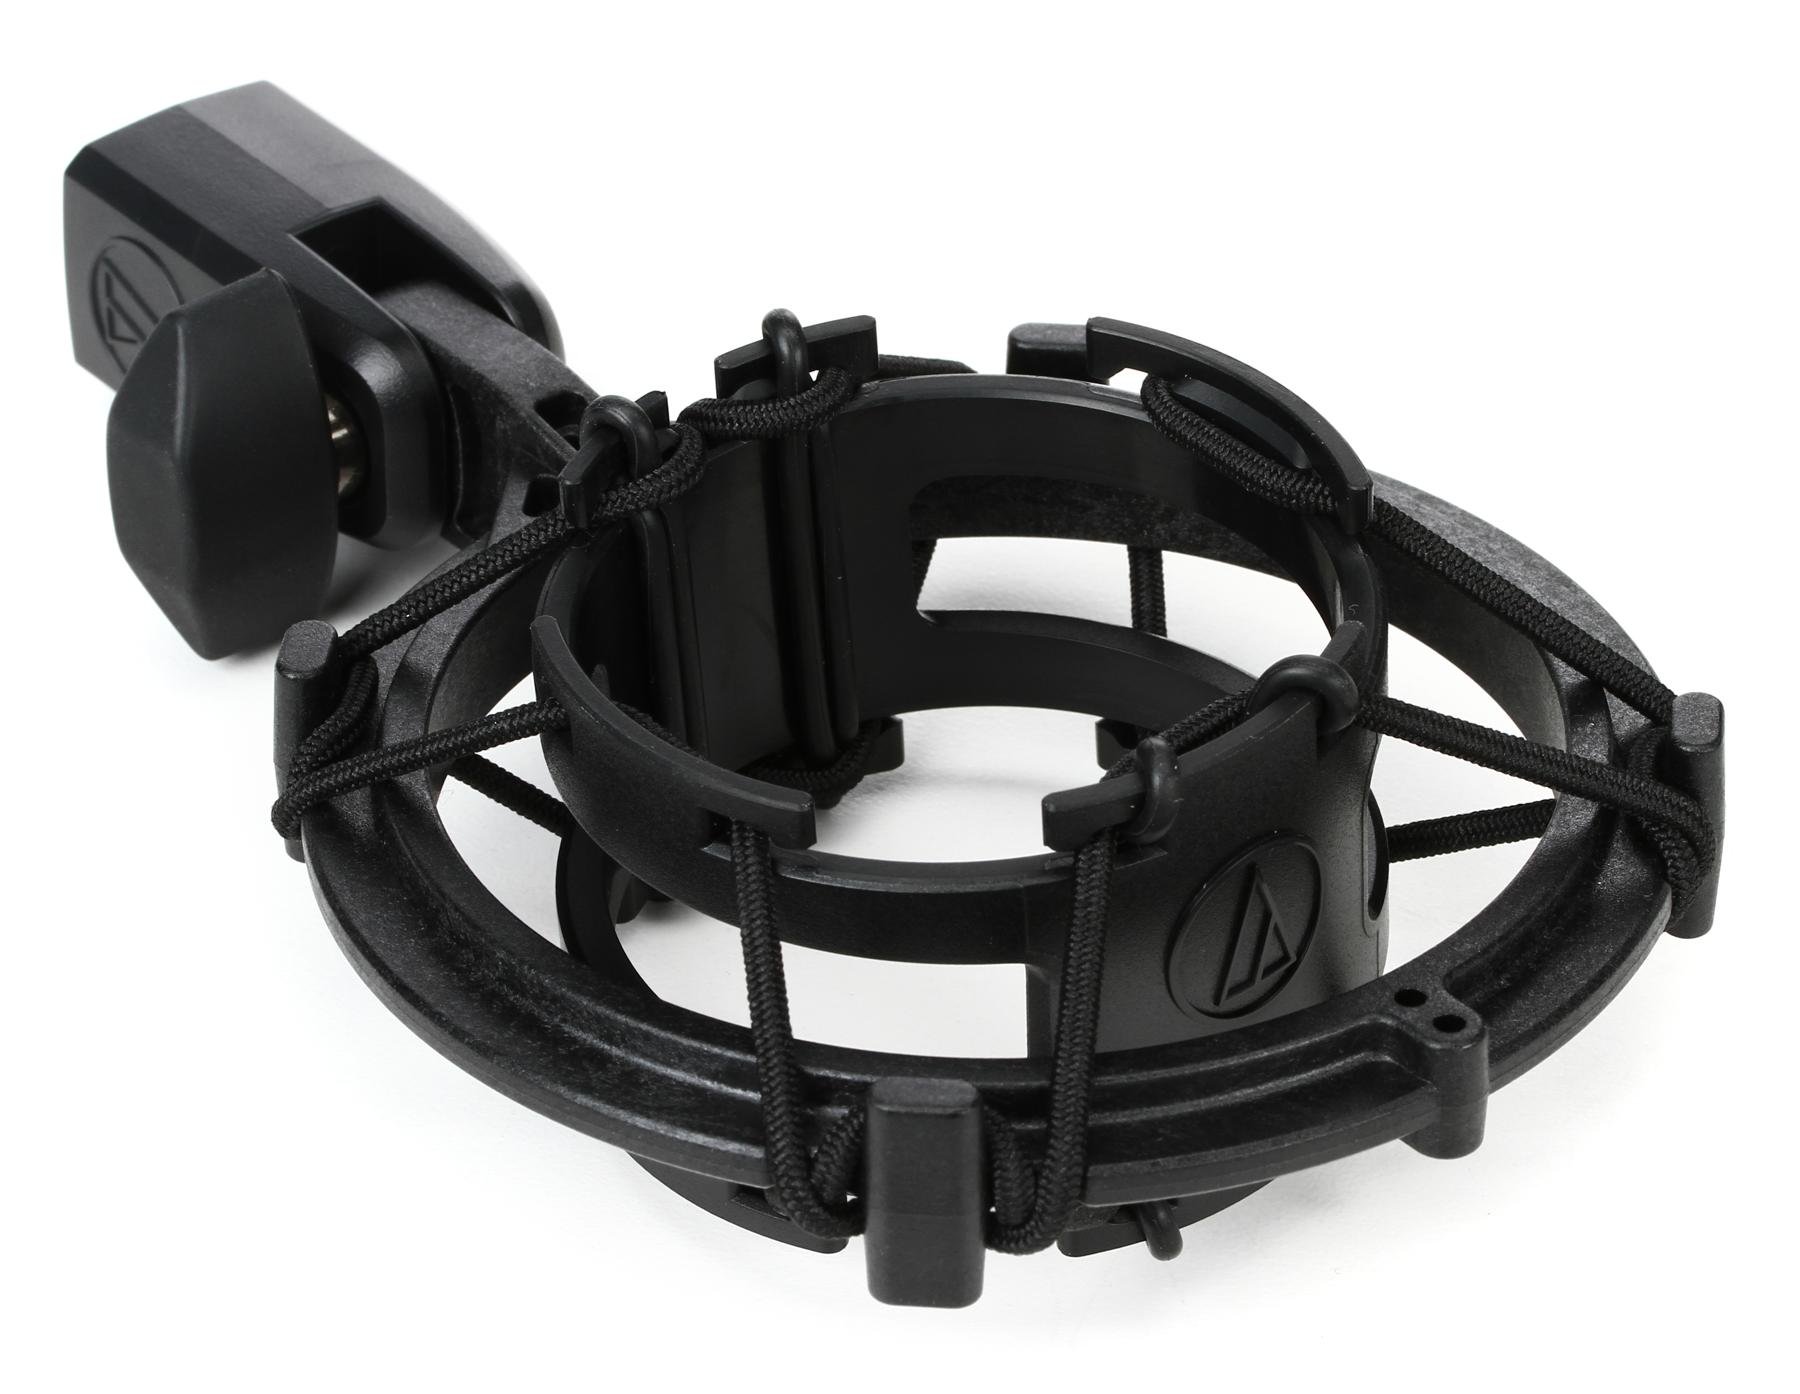 Audio-Technica AT8458a Microphone Shock Mount | Sweetwater